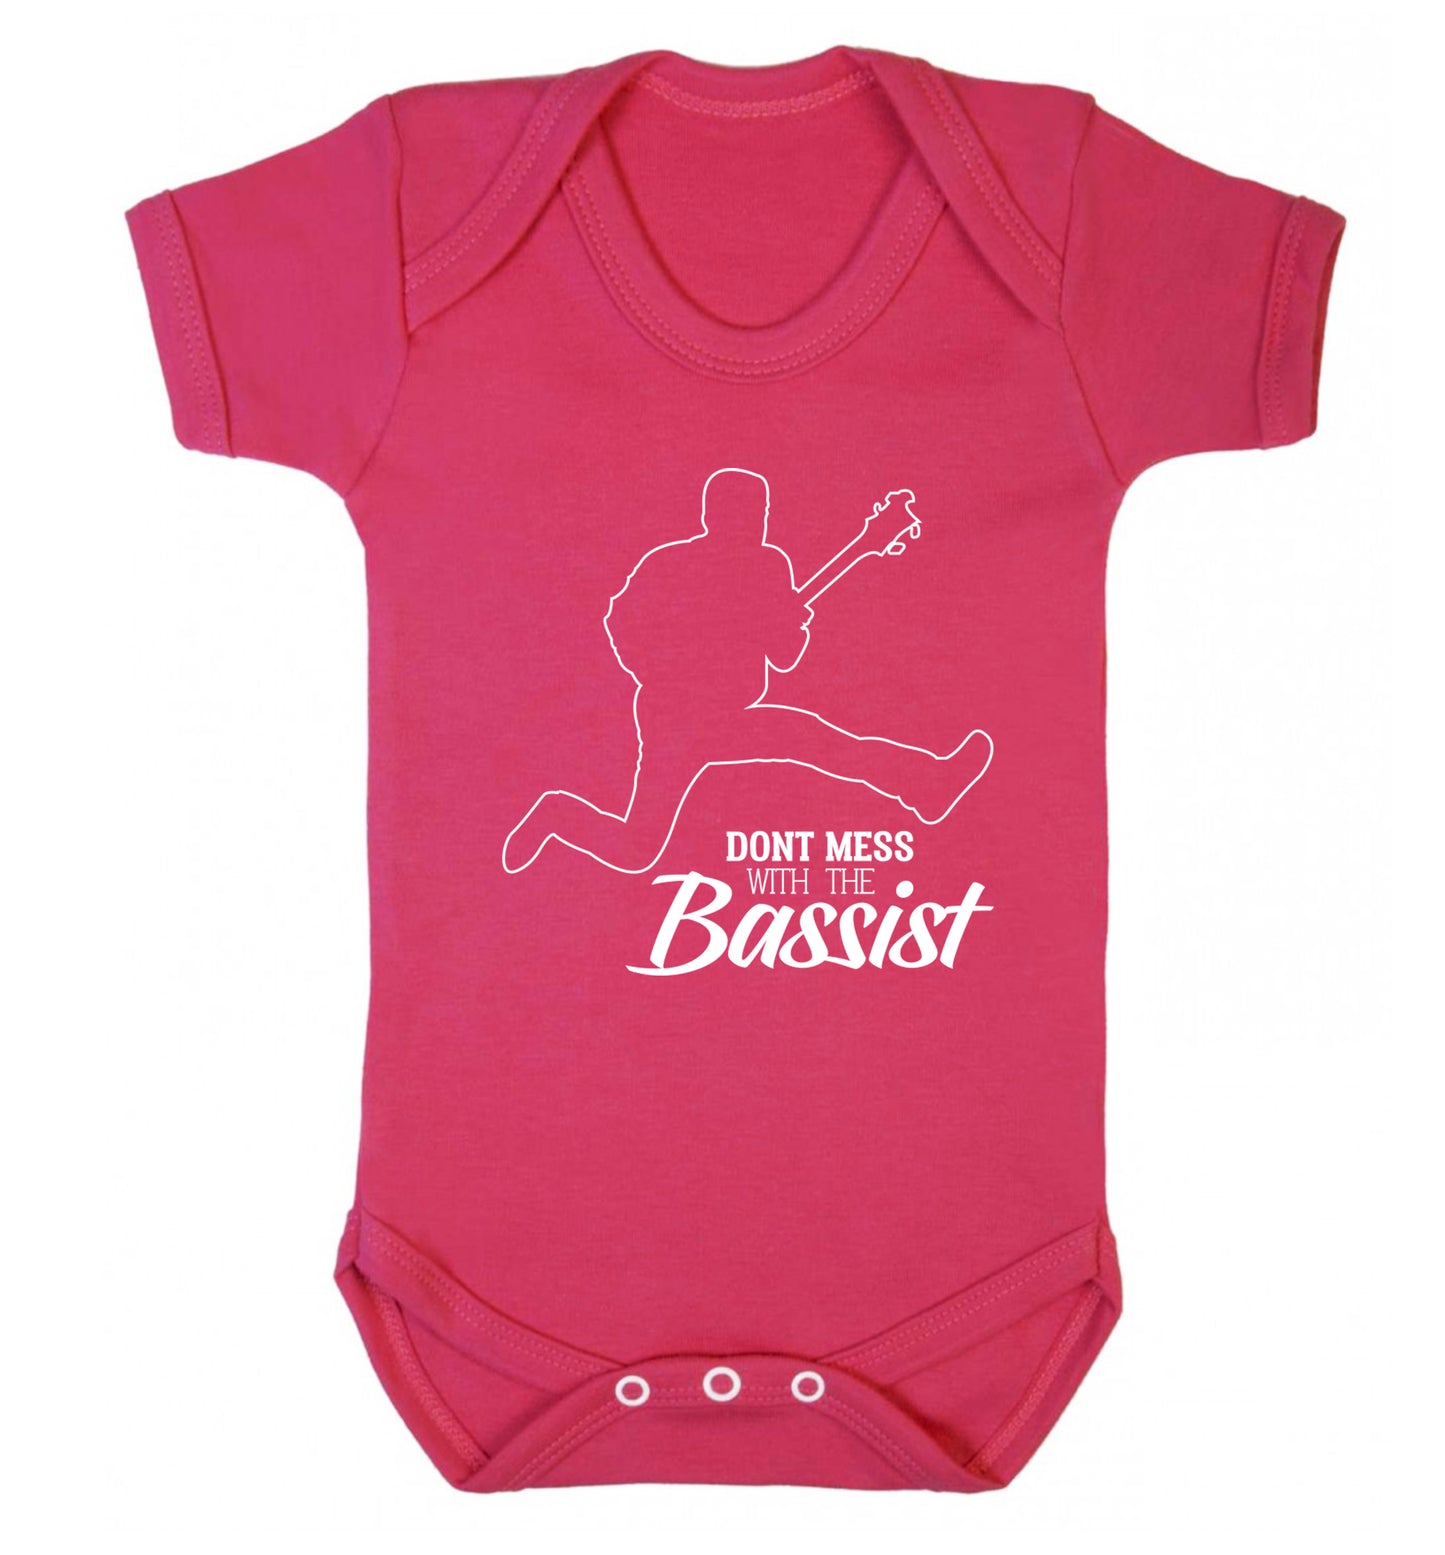 Dont mess with the bassist Baby Vest dark pink 18-24 months